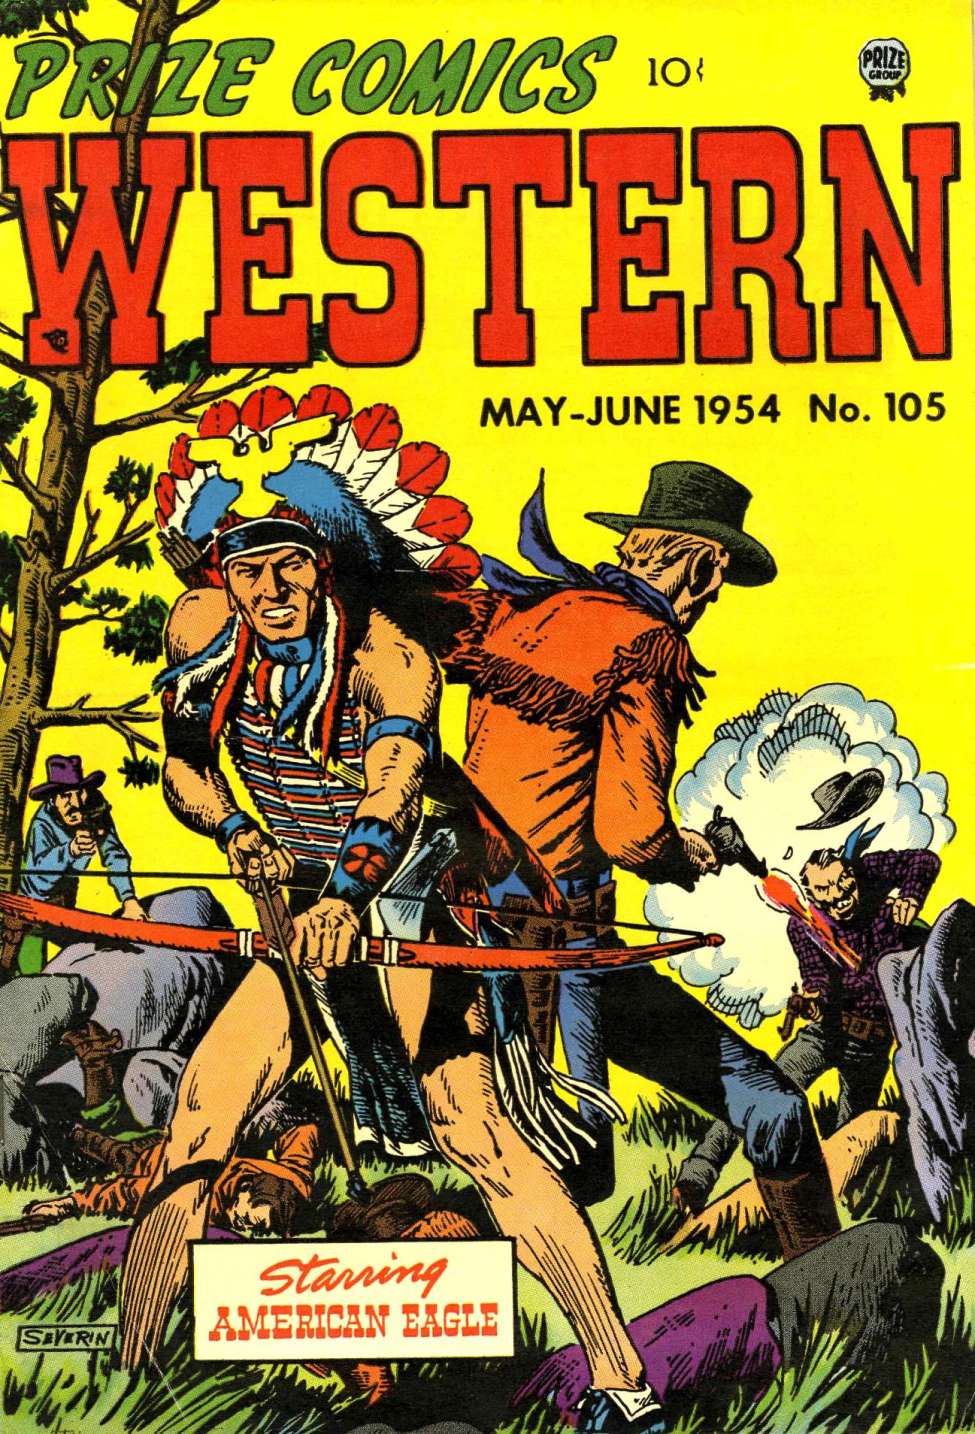 Comic Book Cover For Prize Comics Western 105